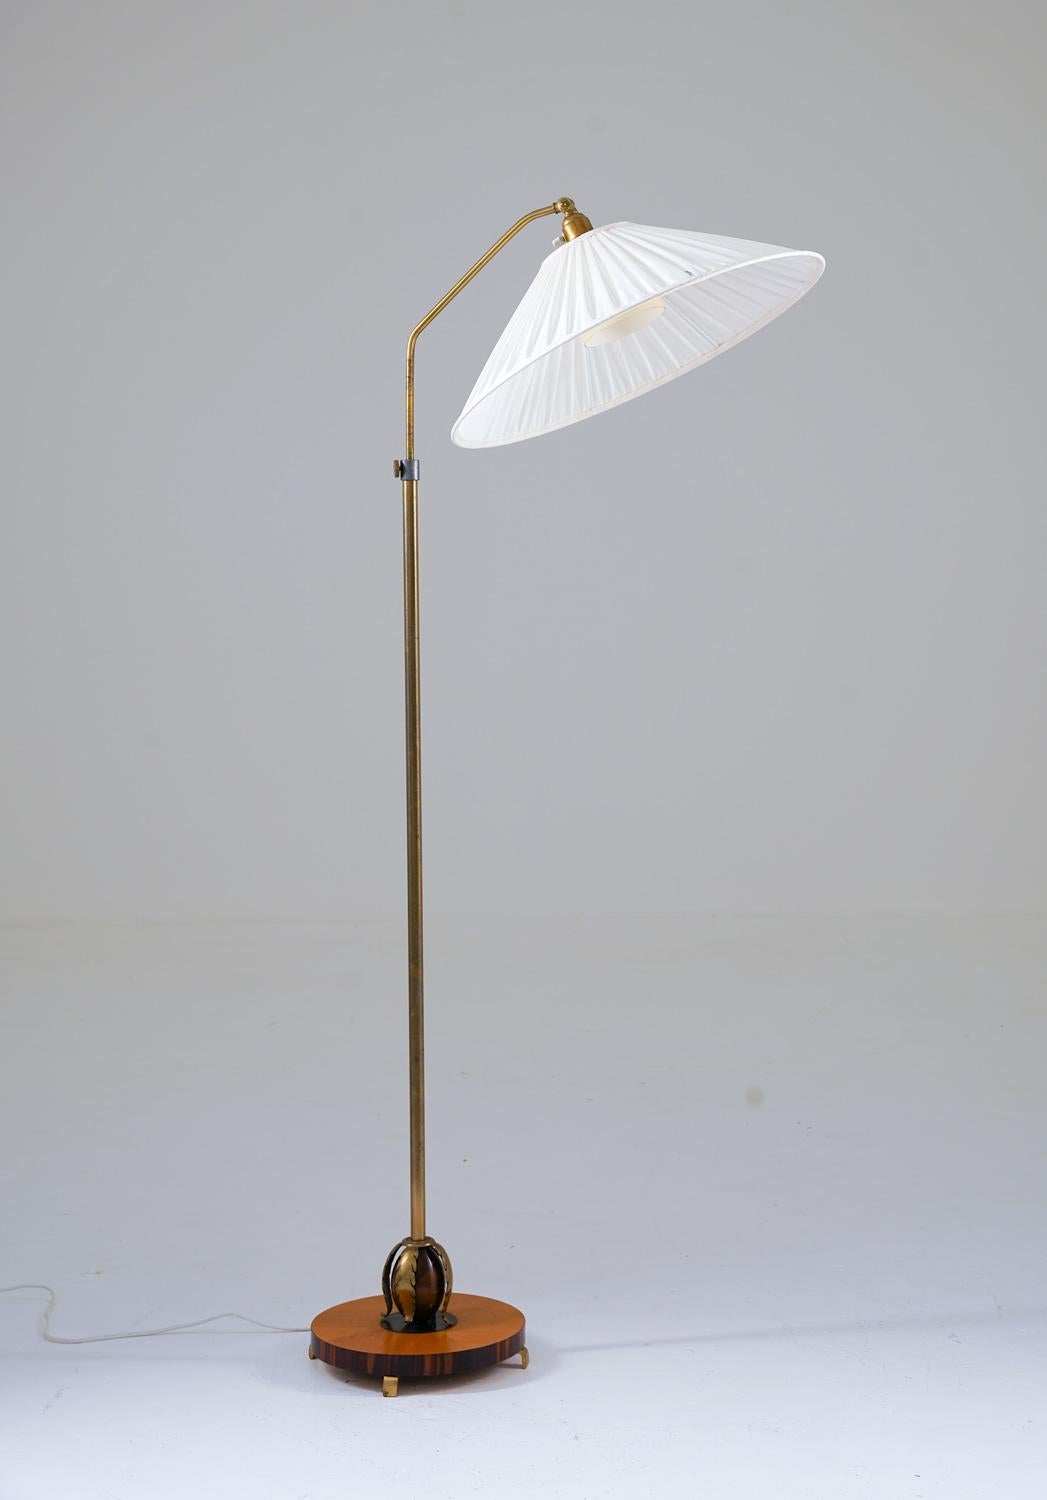 Lovely Art Deco floor lamp manufactured in Sweden, 1940s. 
The lamp consists of a base in zebrawood and elm, with leaf-shaped ornaments in brass. The base supports the brass rod, which is adjustable in height. 
Maximum height is 175cm